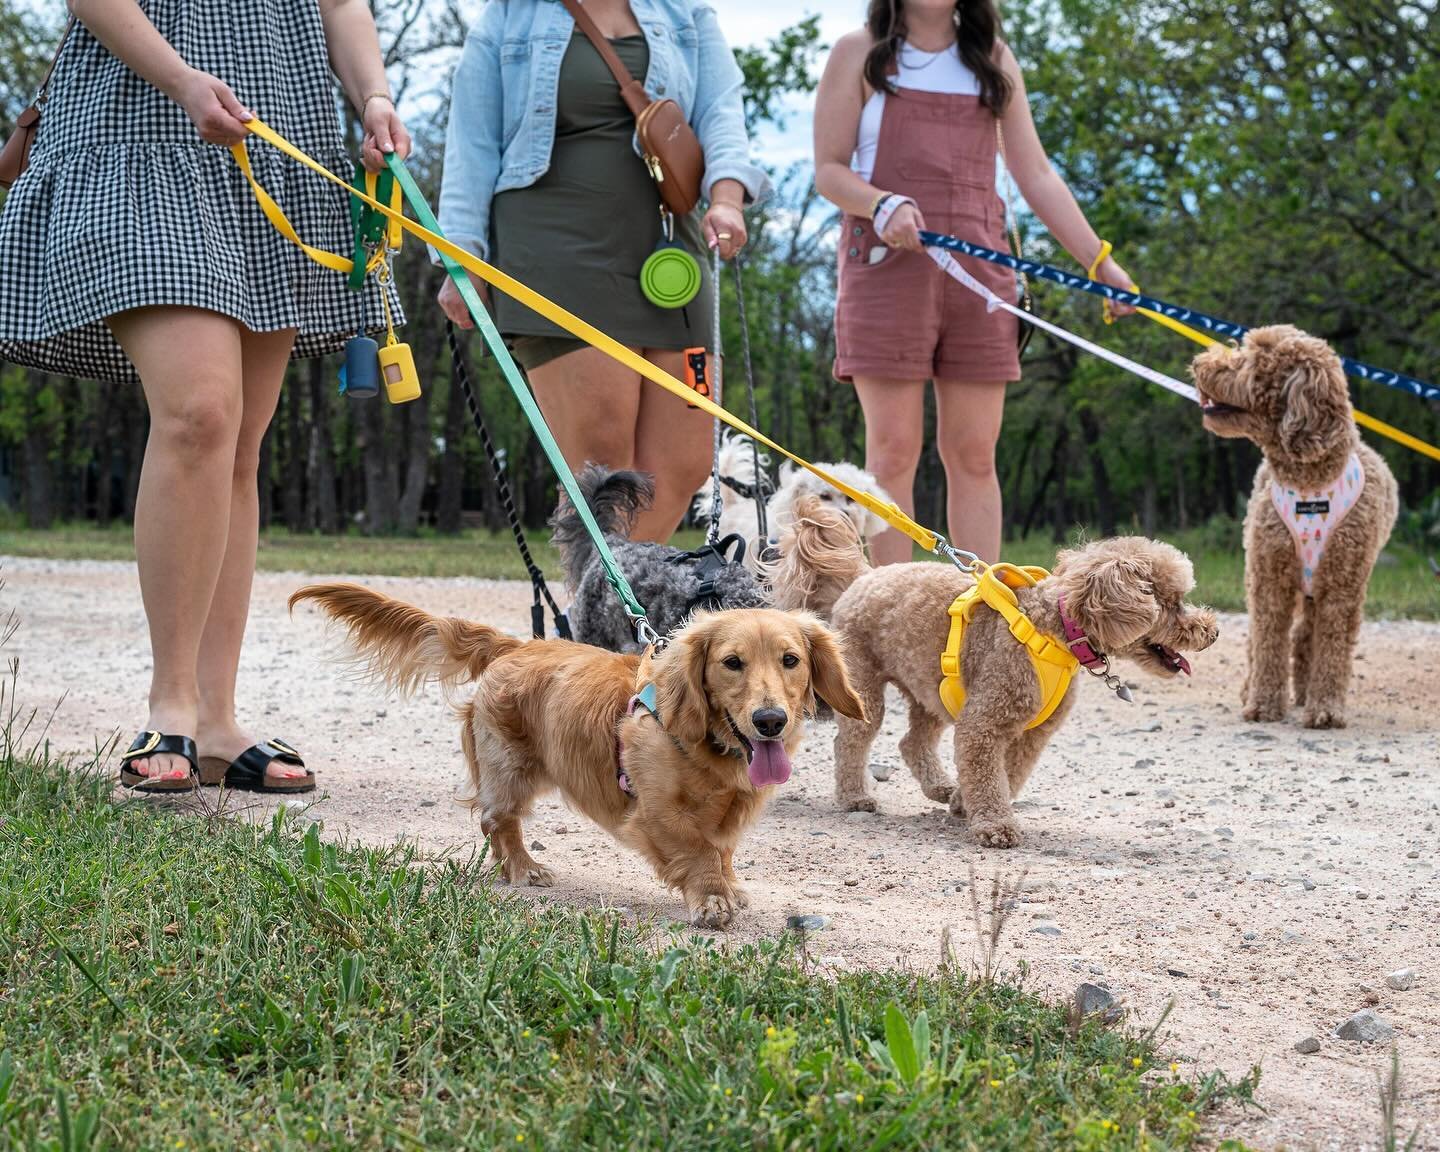 Rolling into Yappy Hour @bluemont_texas like&hellip;.🐾🍻

We had the #bestdayever shooting with the furriest models to help promote Bluemont&rsquo;s new Yappy Hour series which will include a variety of pup-friendly promos, events and opportunities 